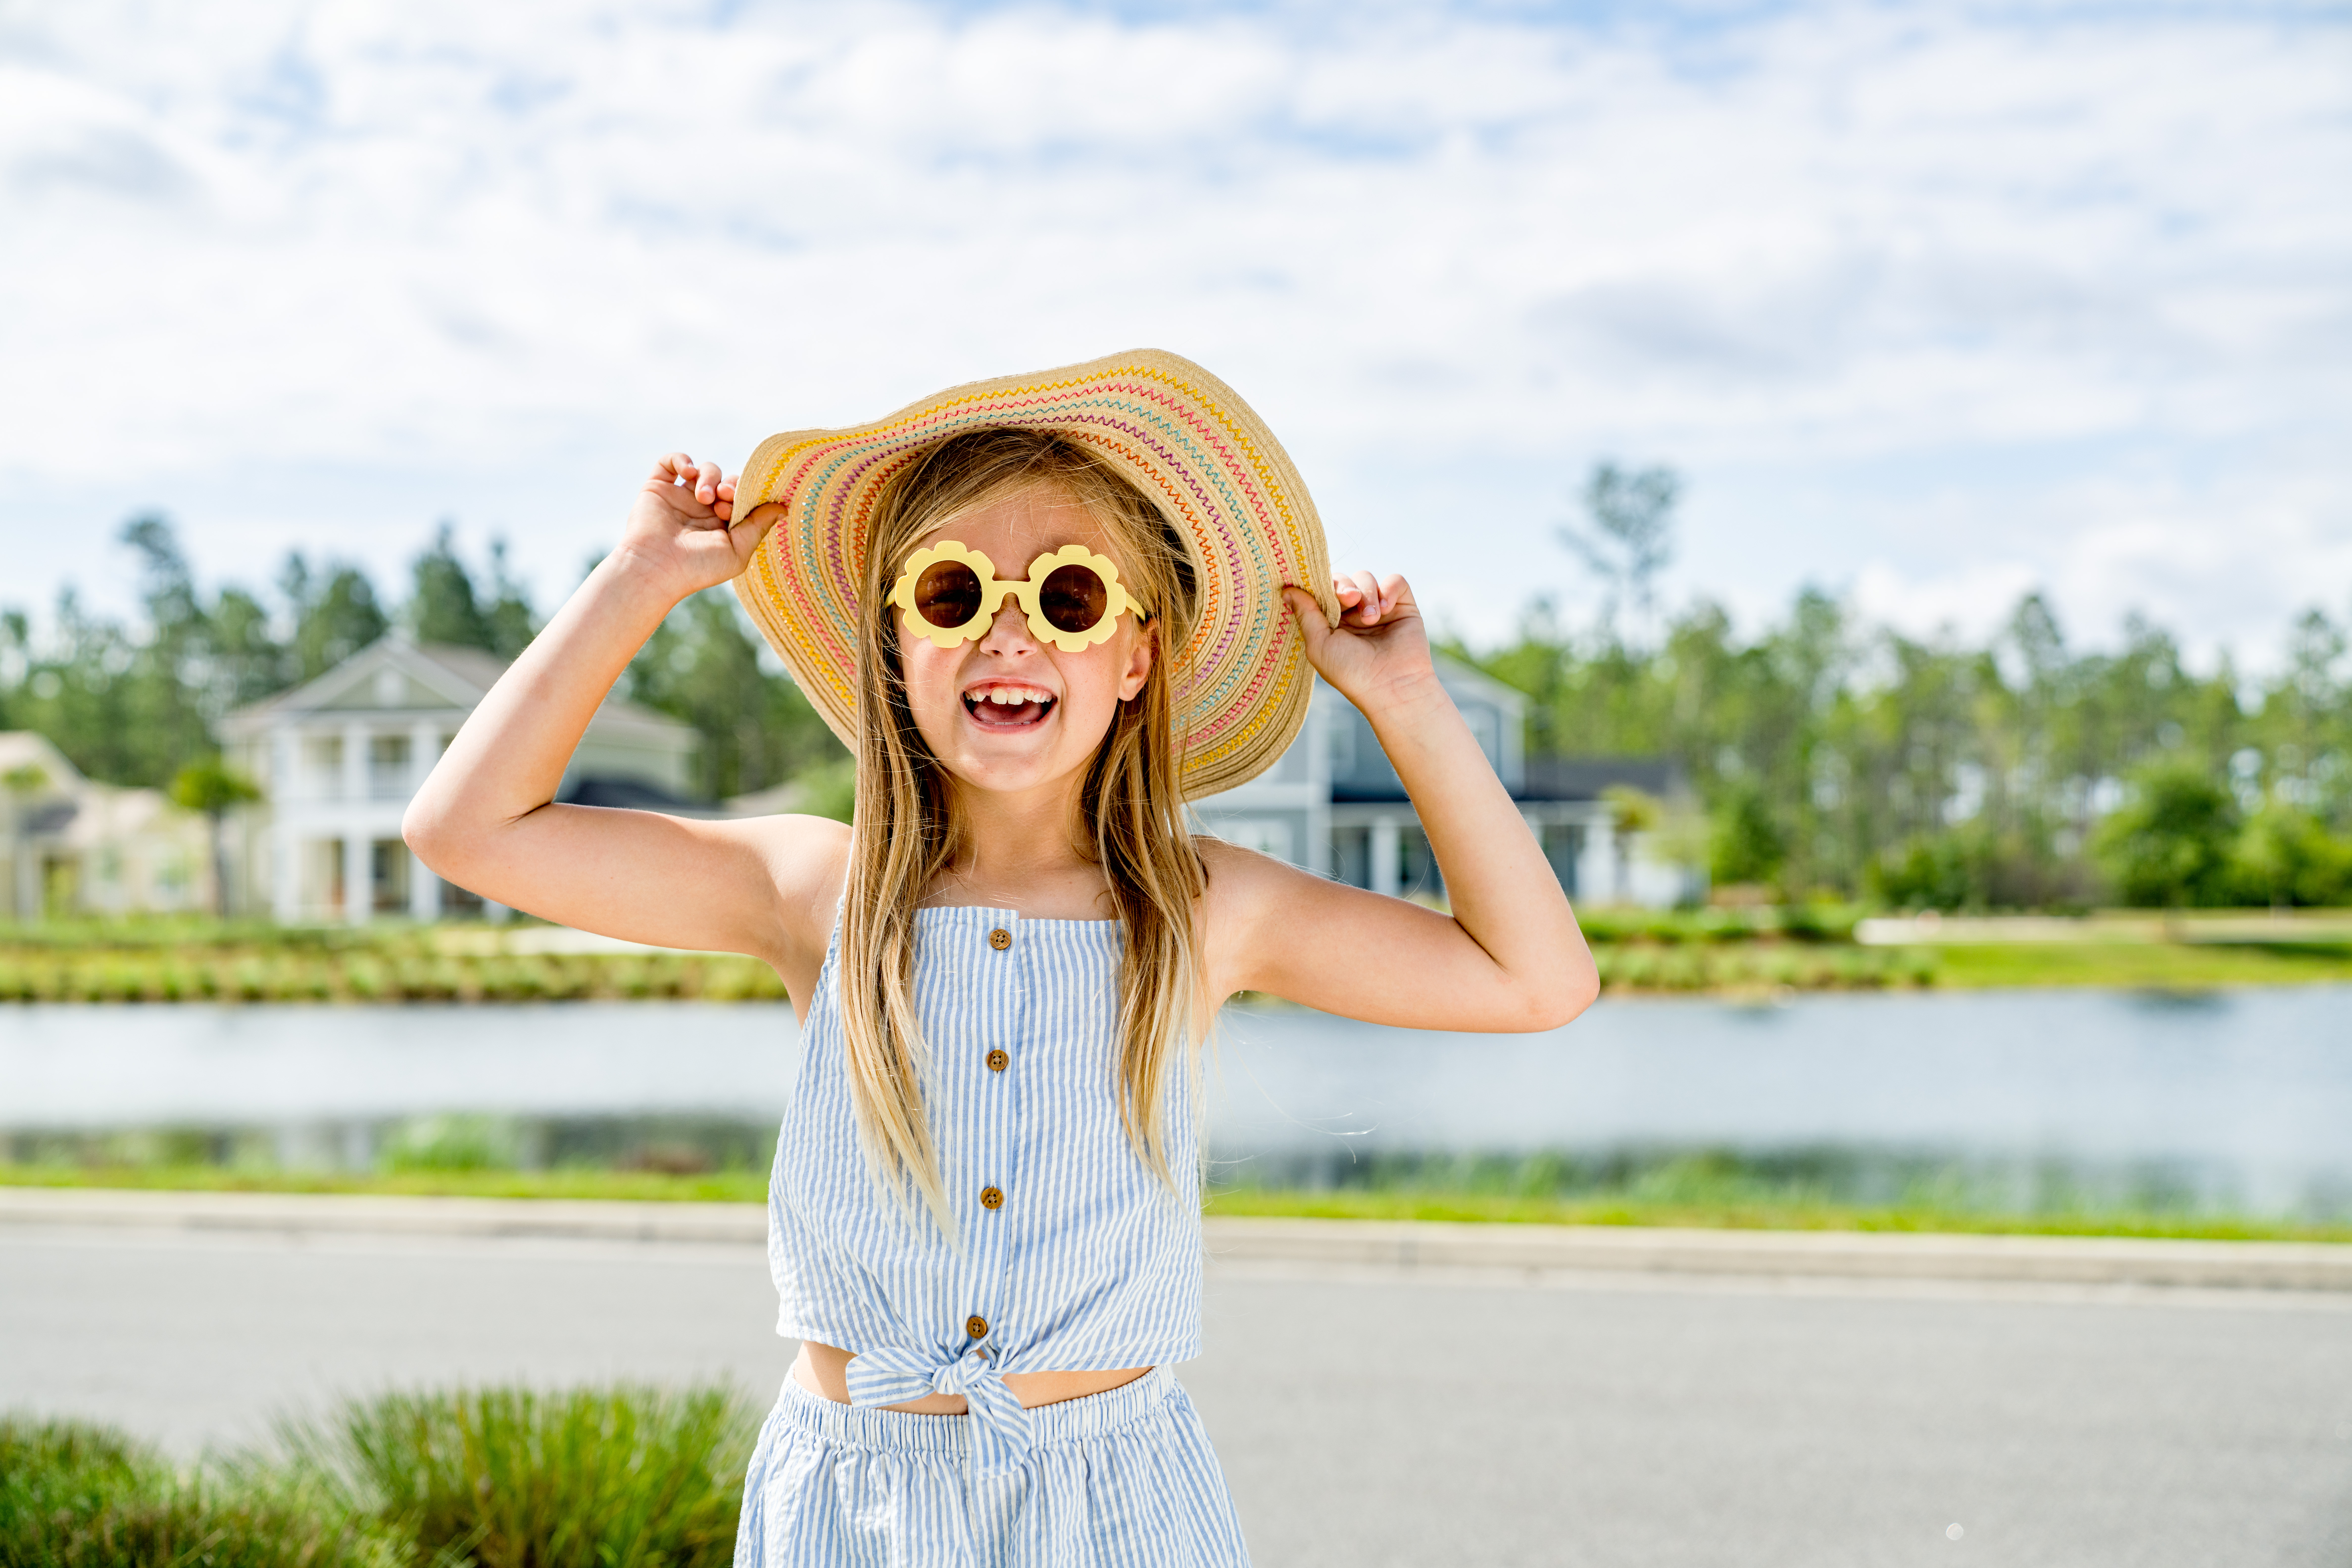 Young girl wearing a sunhat and flower sunglasses plays outside.